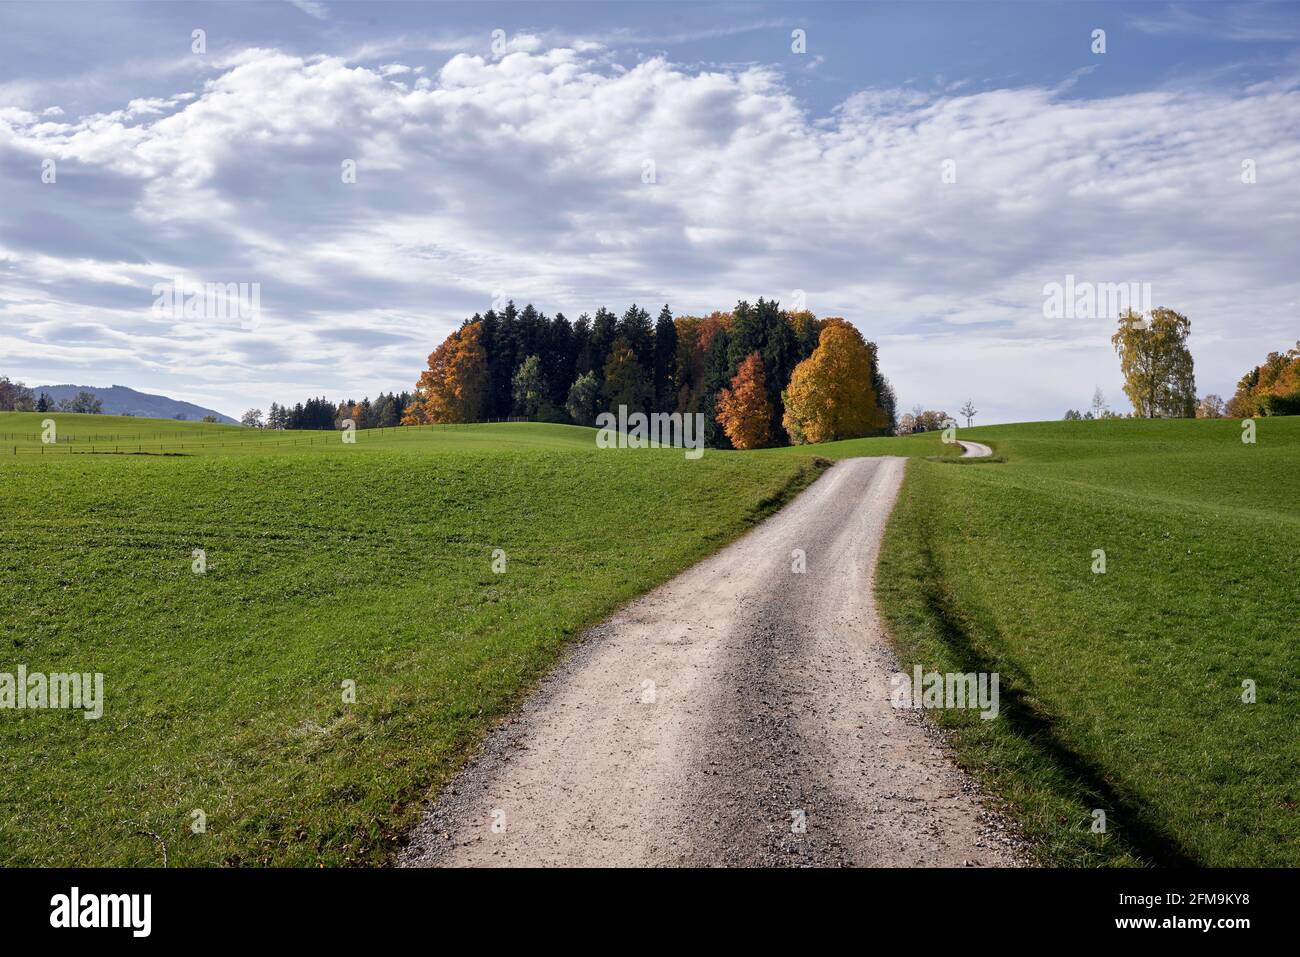 Dirt road in the Bavarian pre-Alps landscape Stock Photo